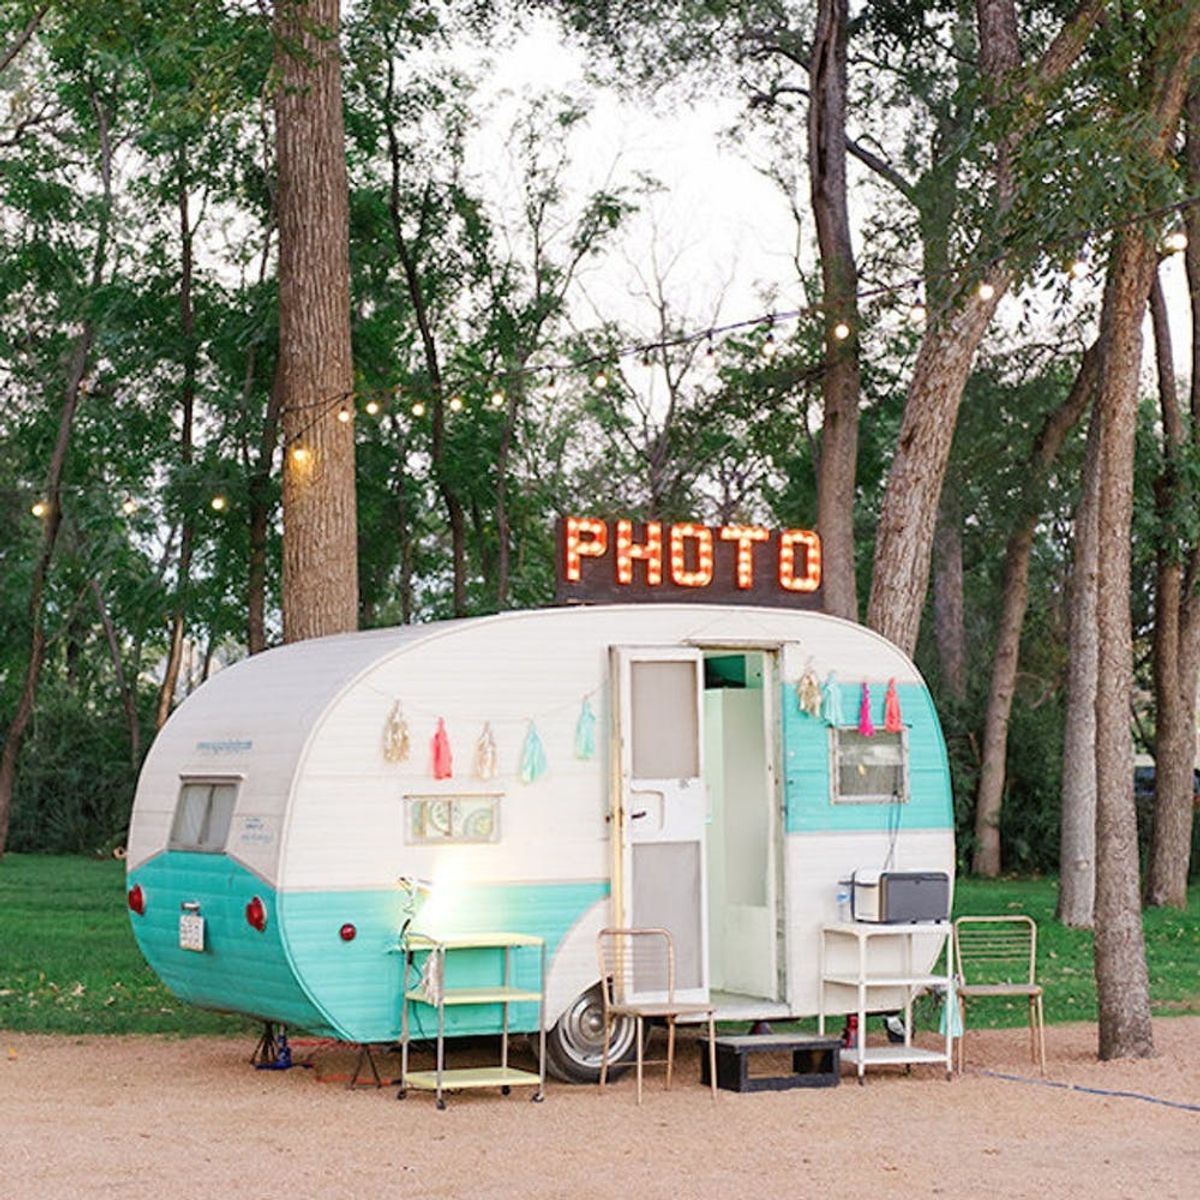 Tie the Knot With These 15 Retro-Inspired Camping Wedding Ideas